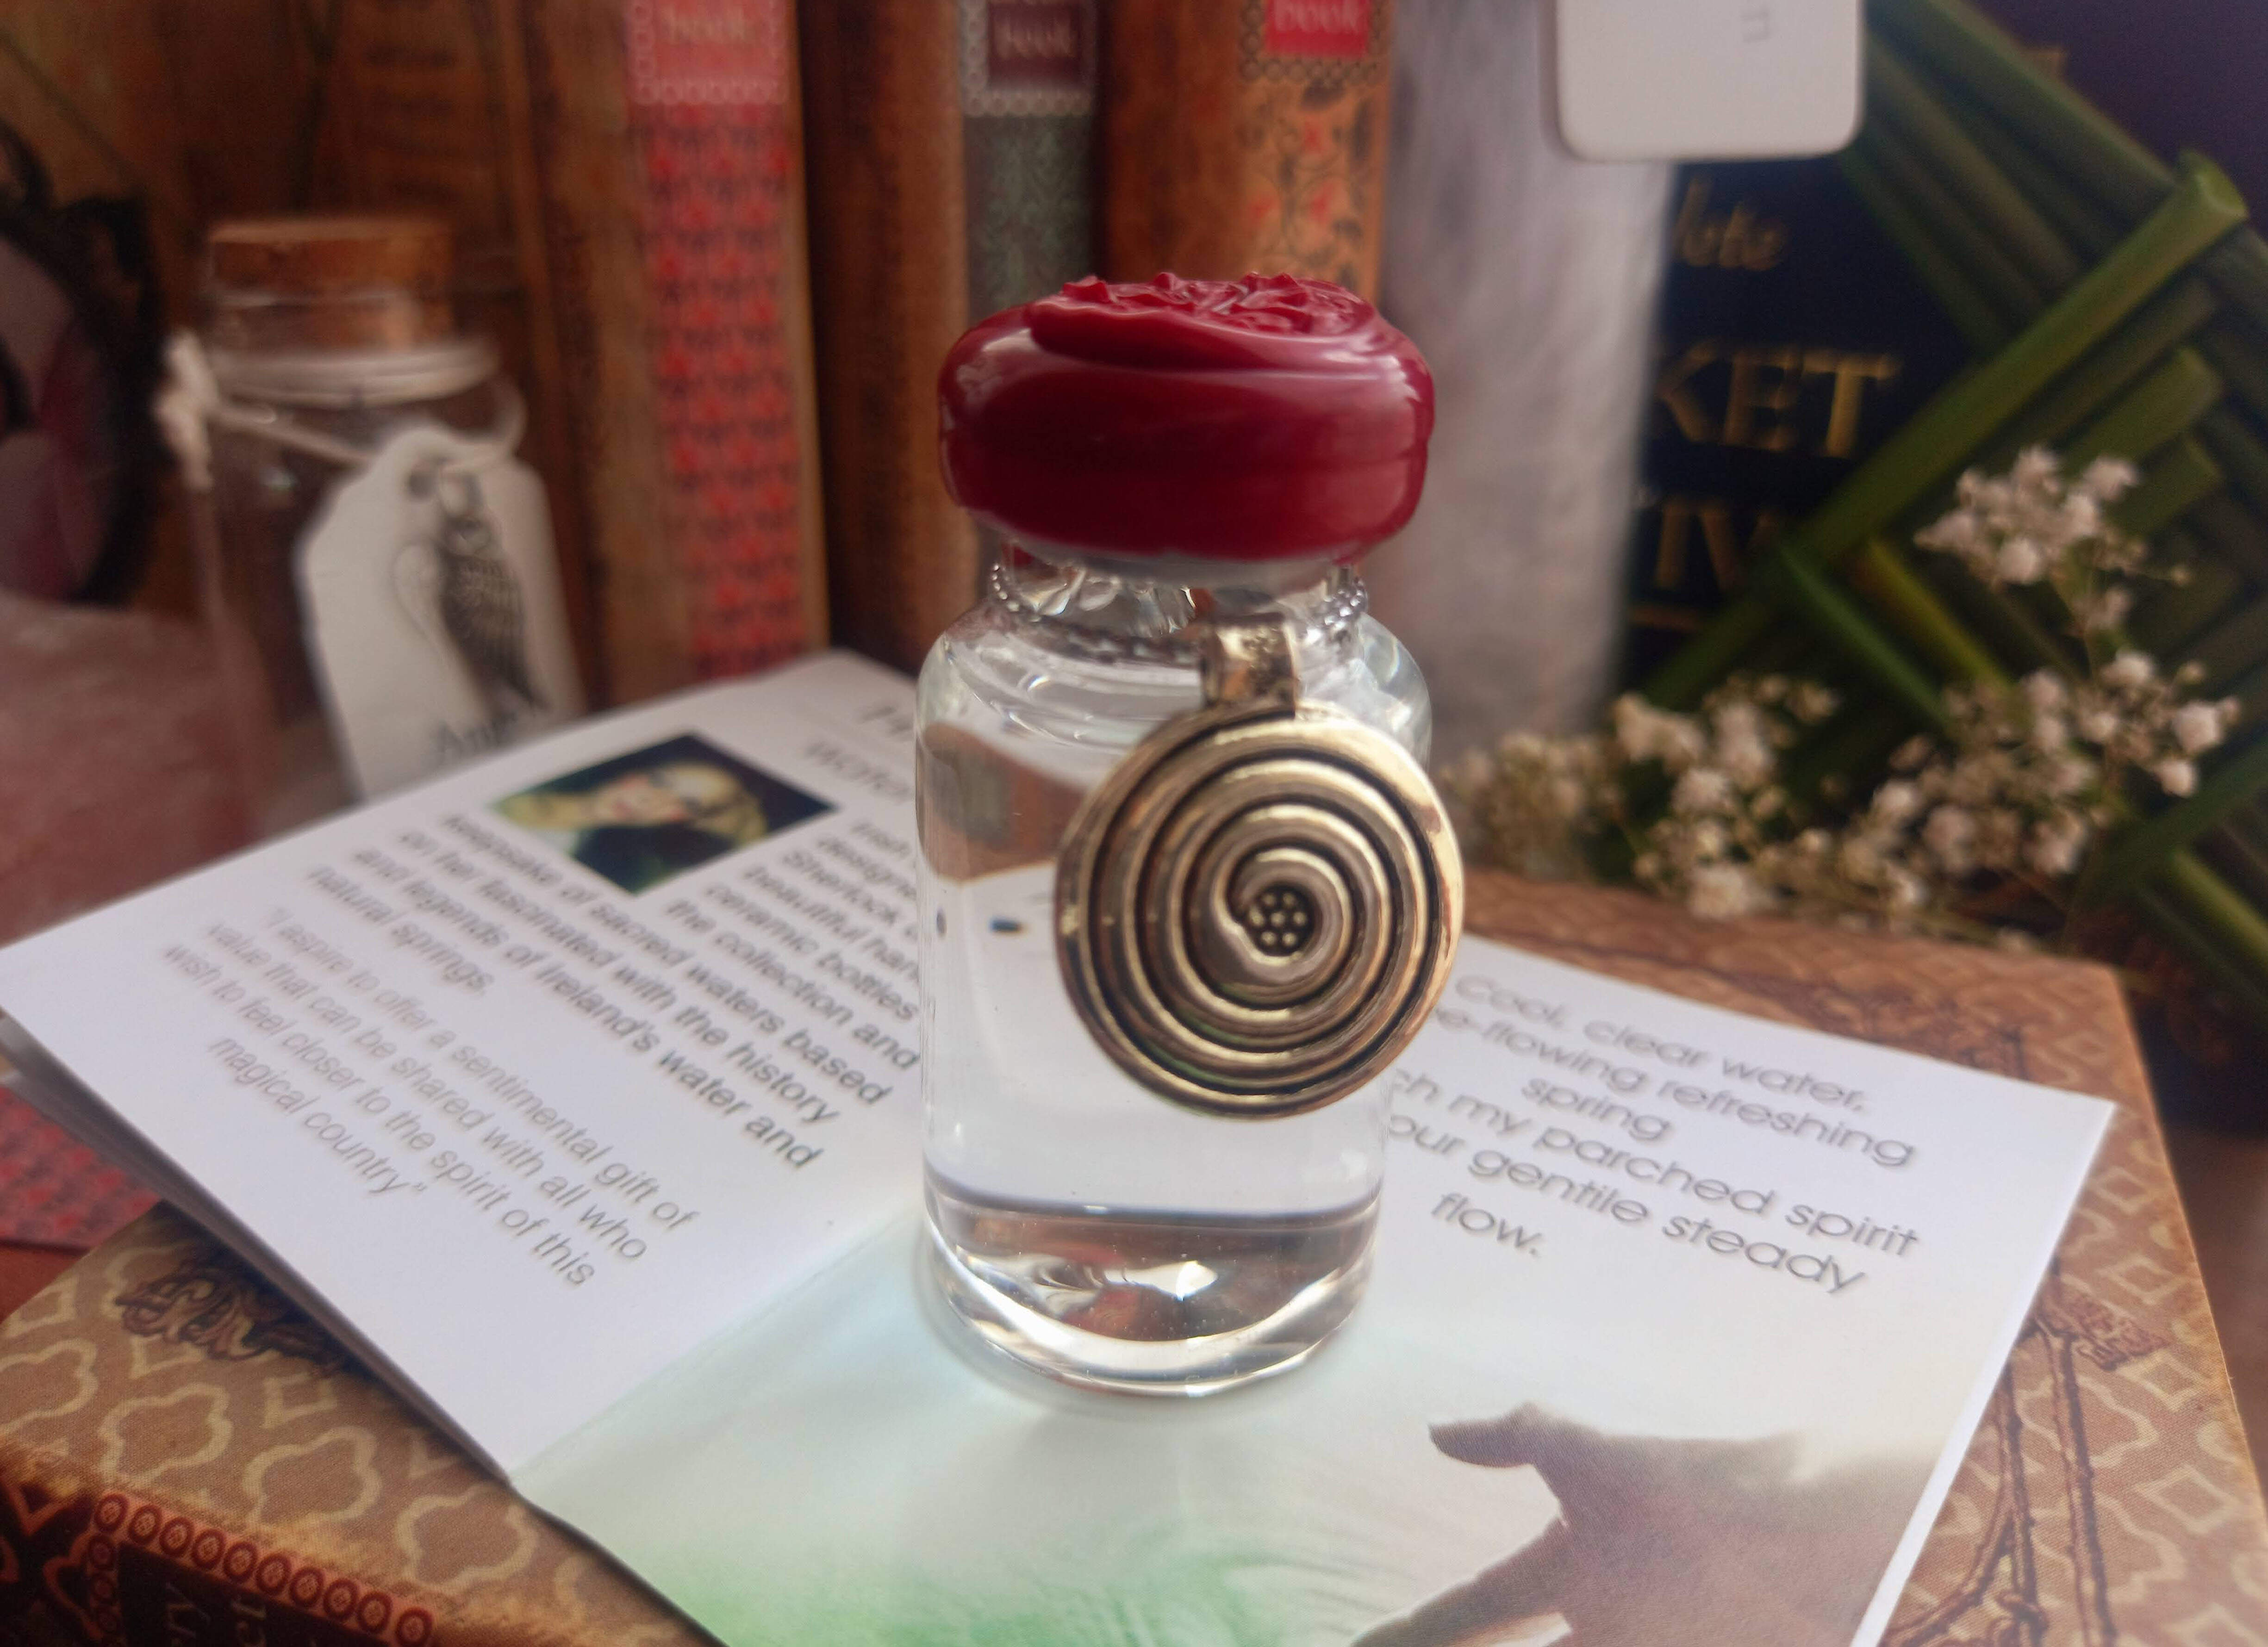 SPECIAL* St. Brigids Well Water Goddess Filled Pendant & Glass Vial